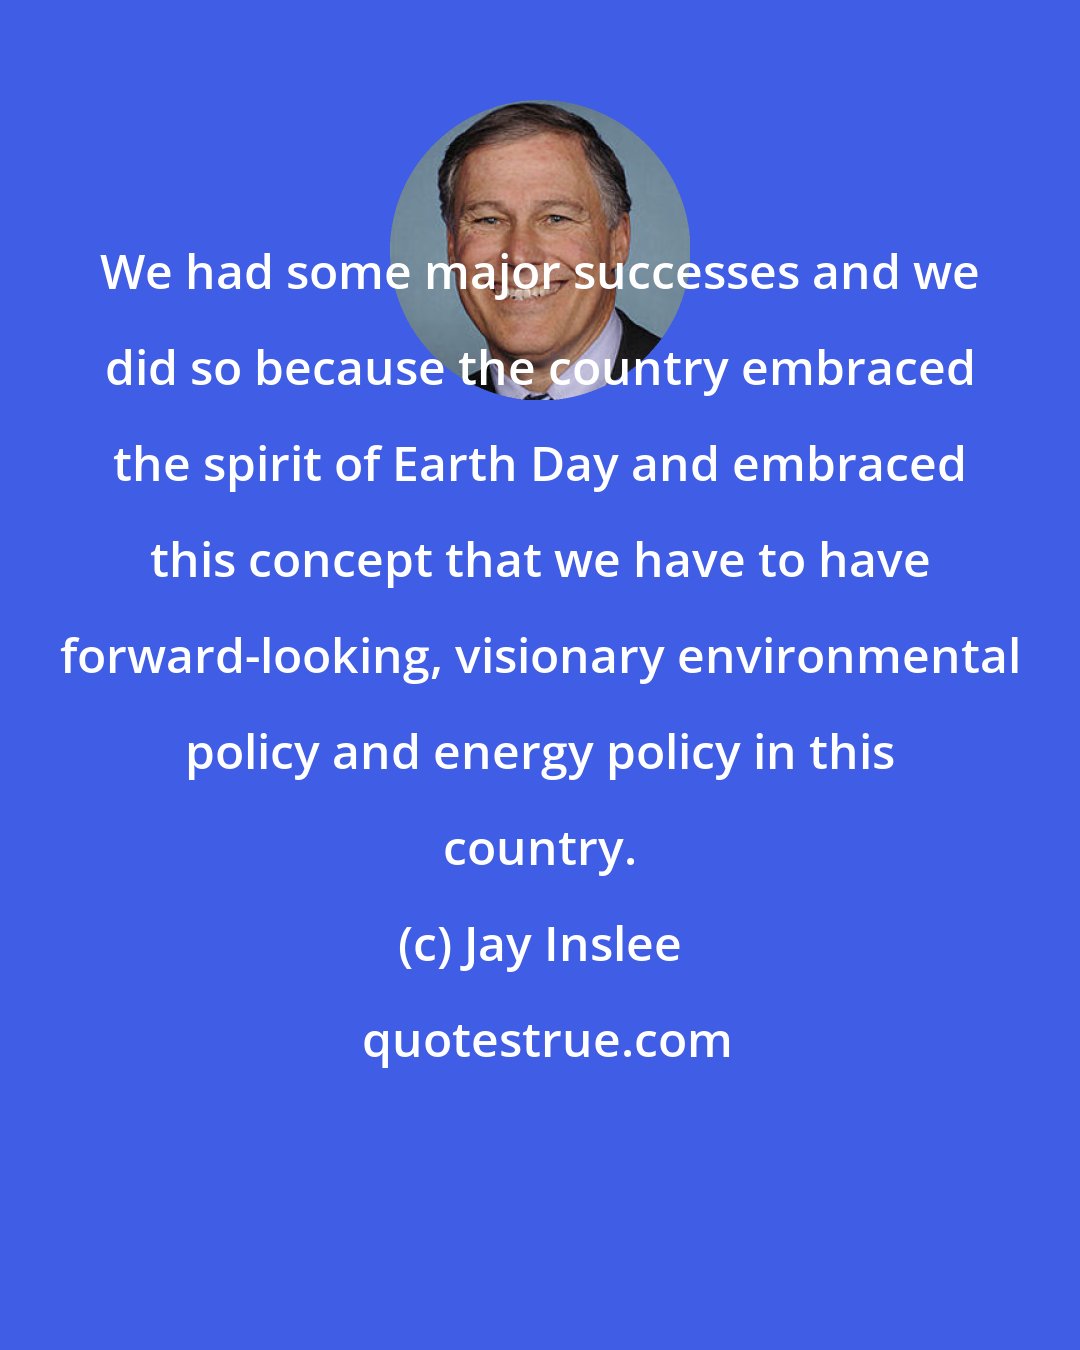 Jay Inslee: We had some major successes and we did so because the country embraced the spirit of Earth Day and embraced this concept that we have to have forward-looking, visionary environmental policy and energy policy in this country.